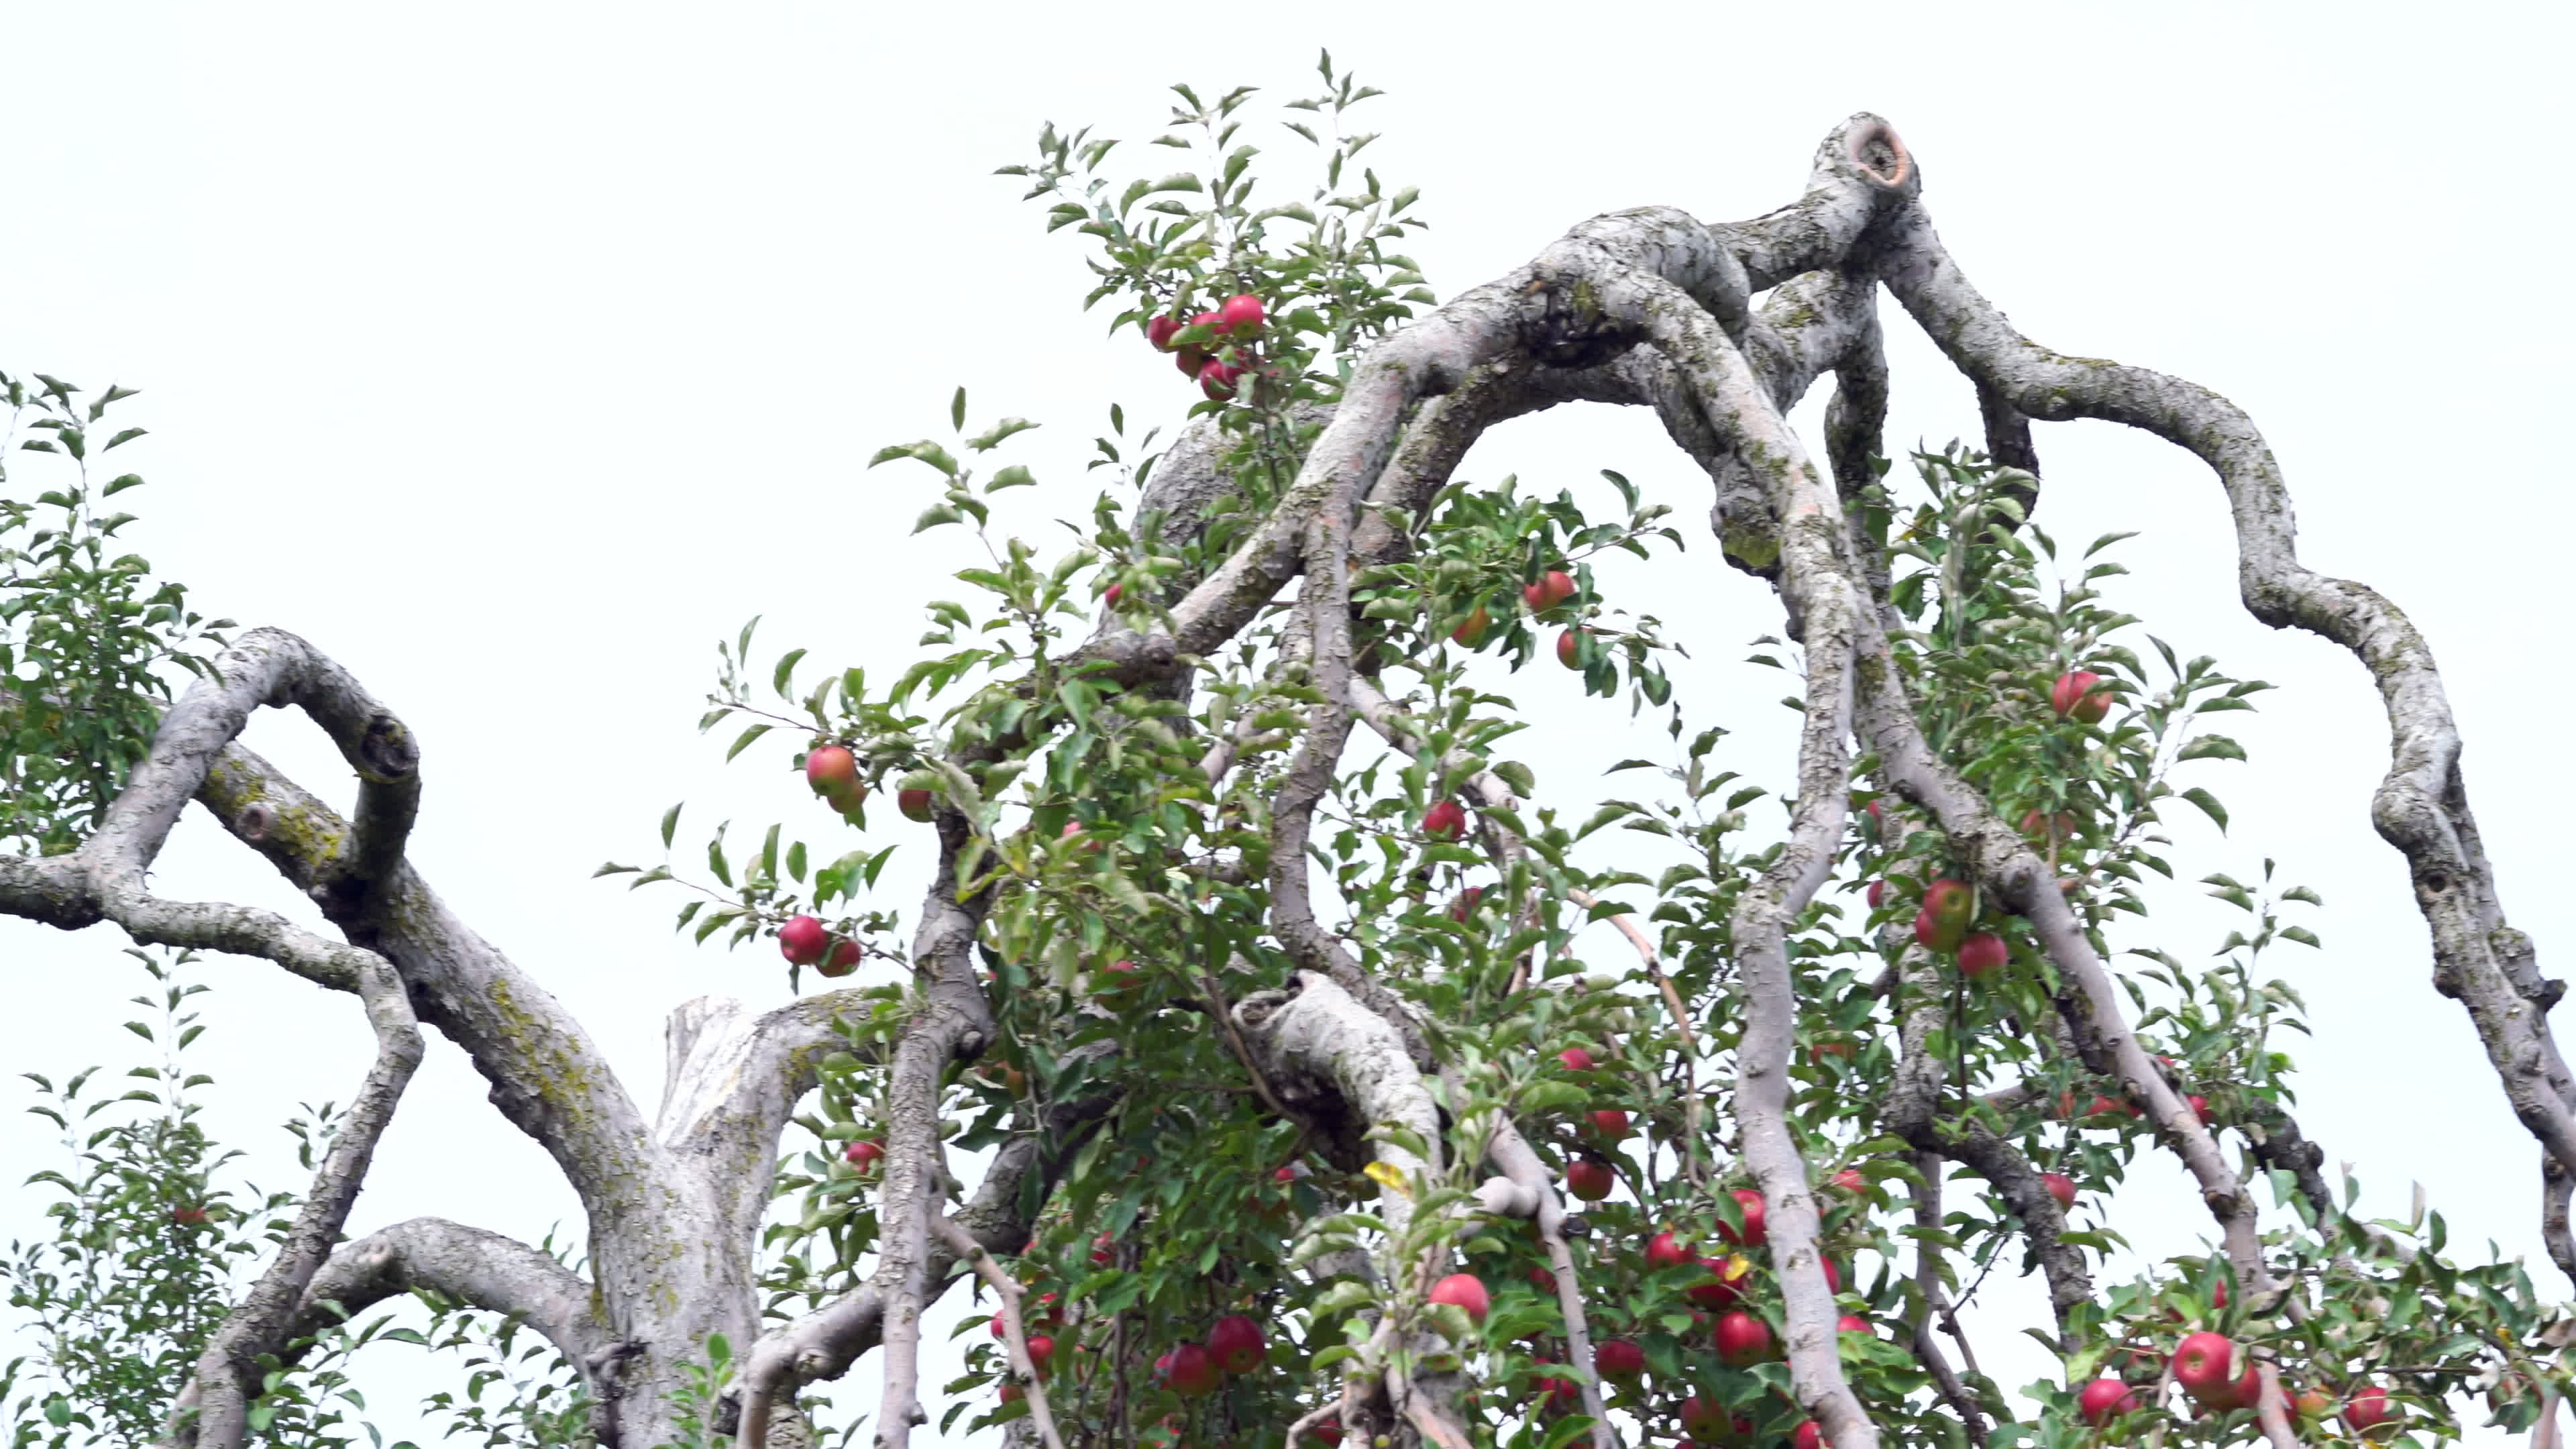 Giant apple tree branches, Orchards' grandeur, Panoramic view, Nature's majesty, 3840x2160 4K Desktop